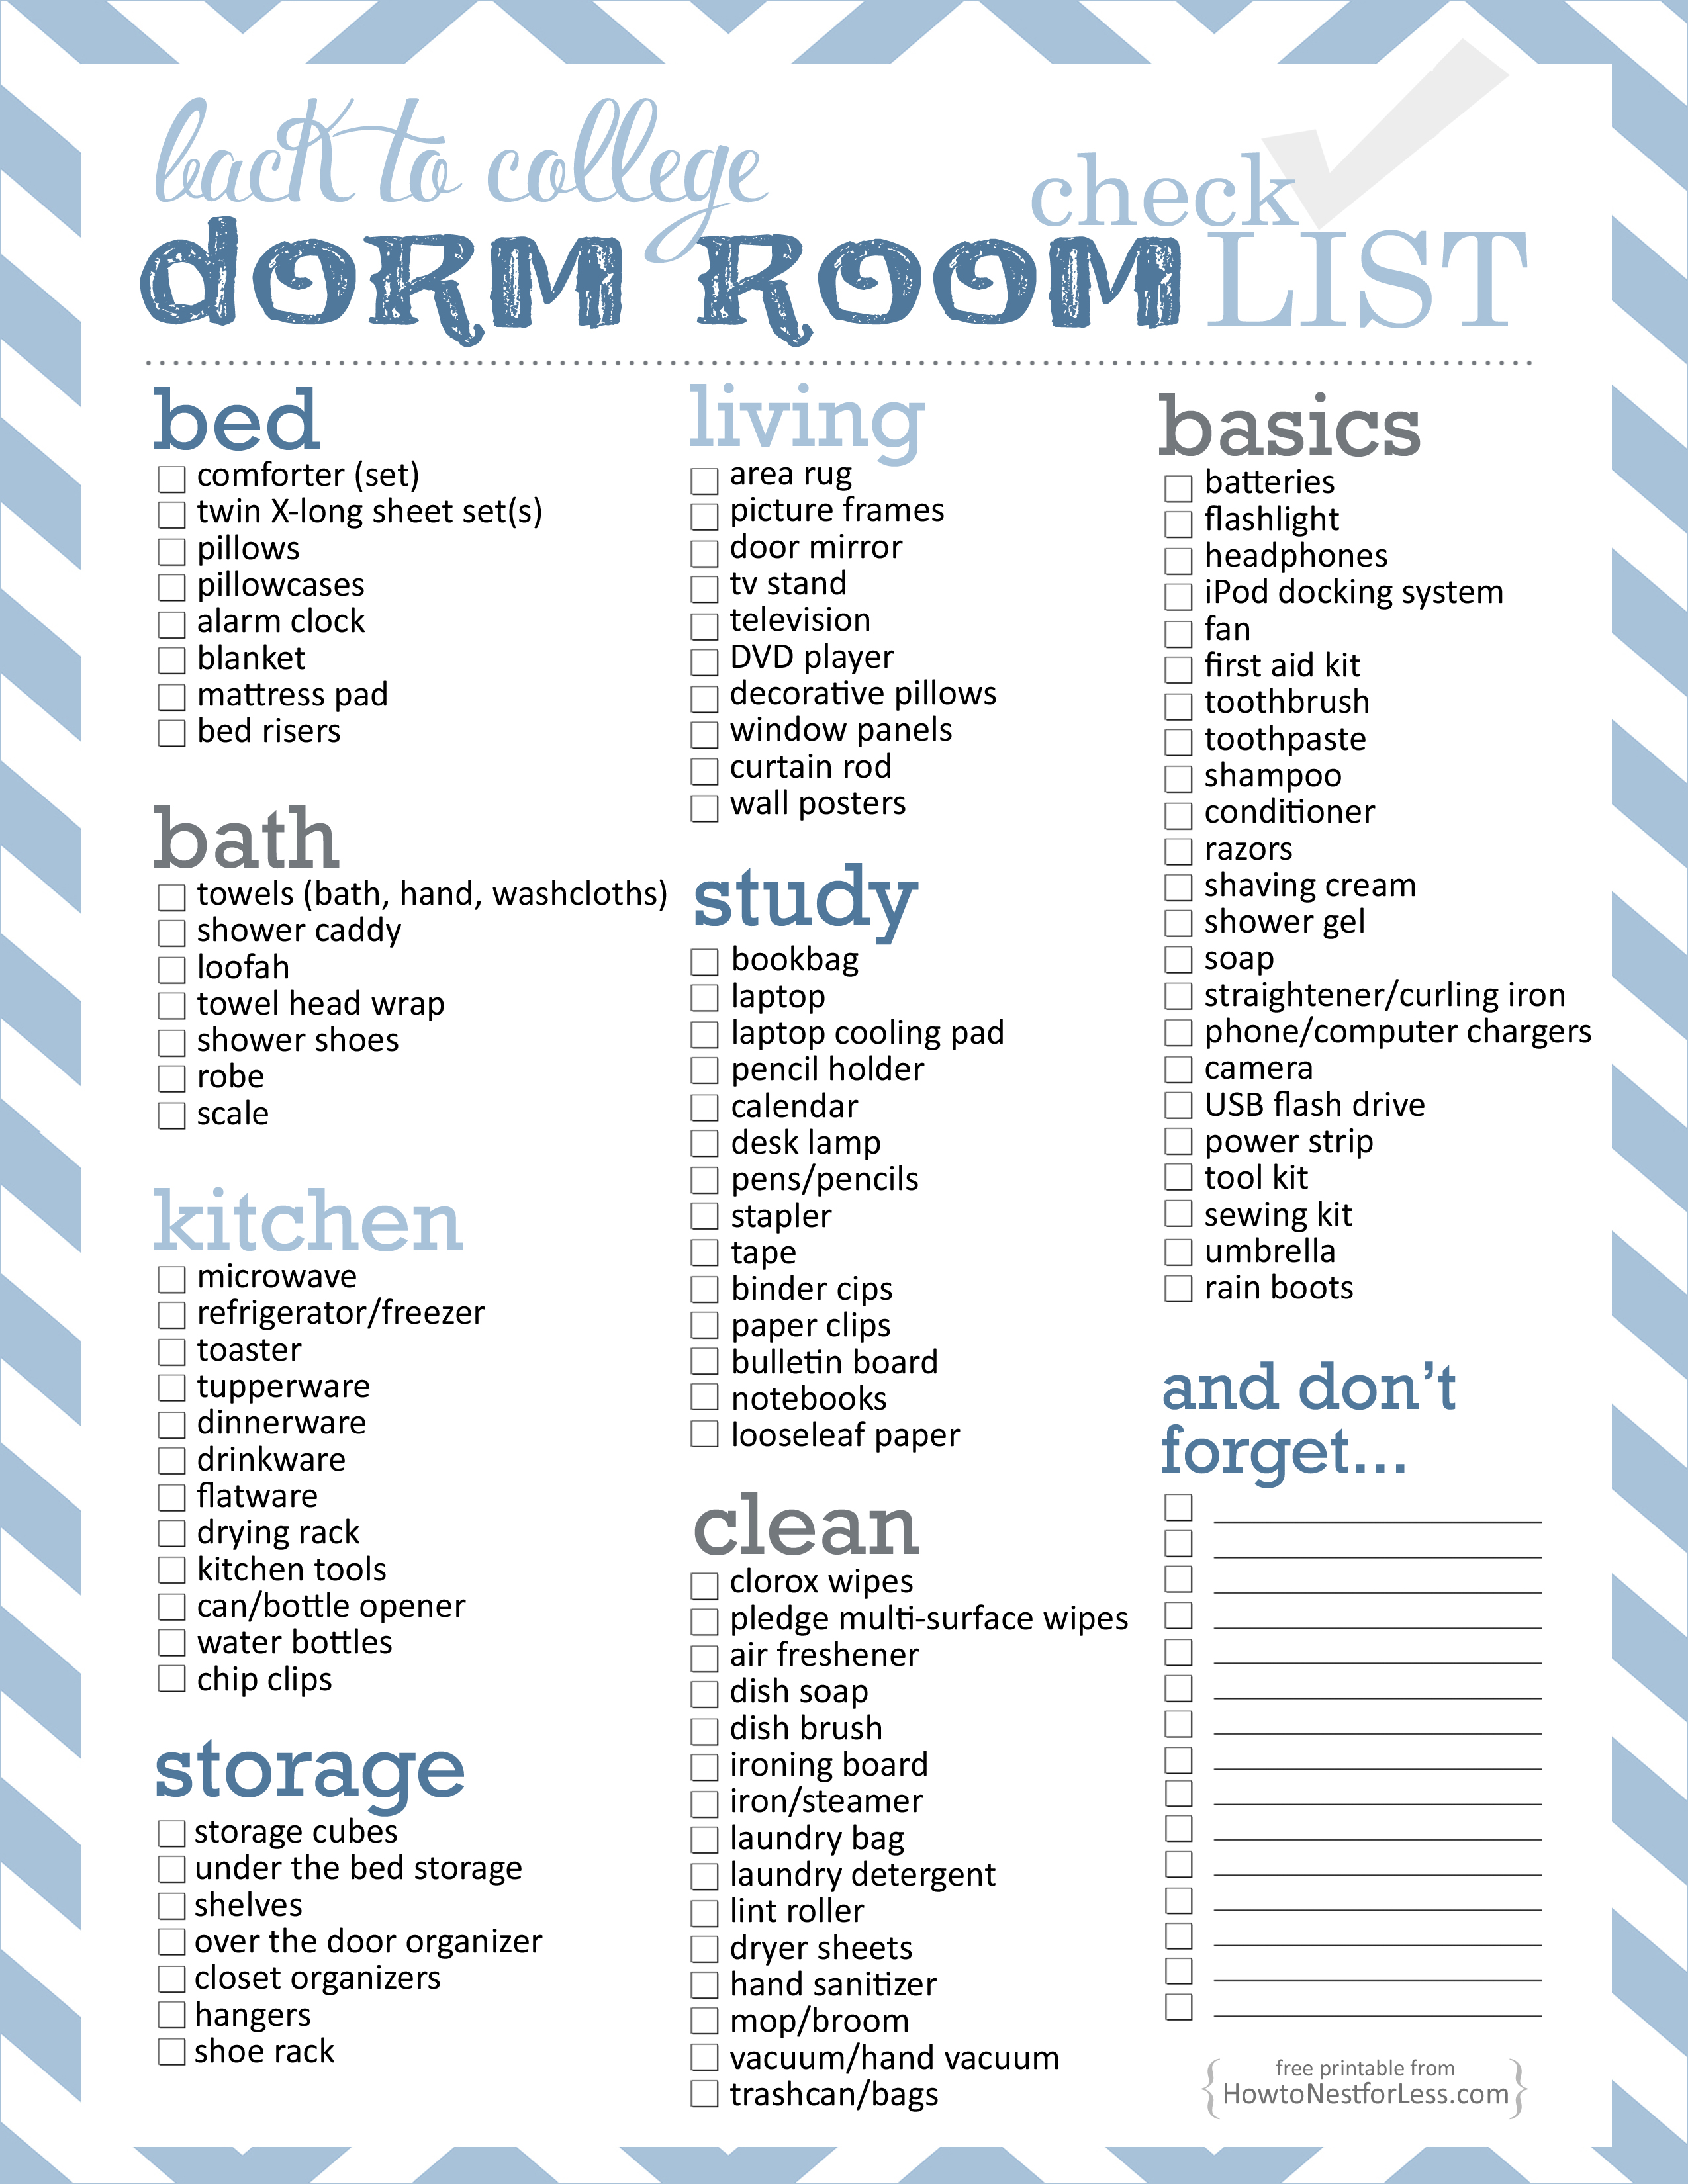 Dorm Room Checklist free printable   How to Nest for Less™